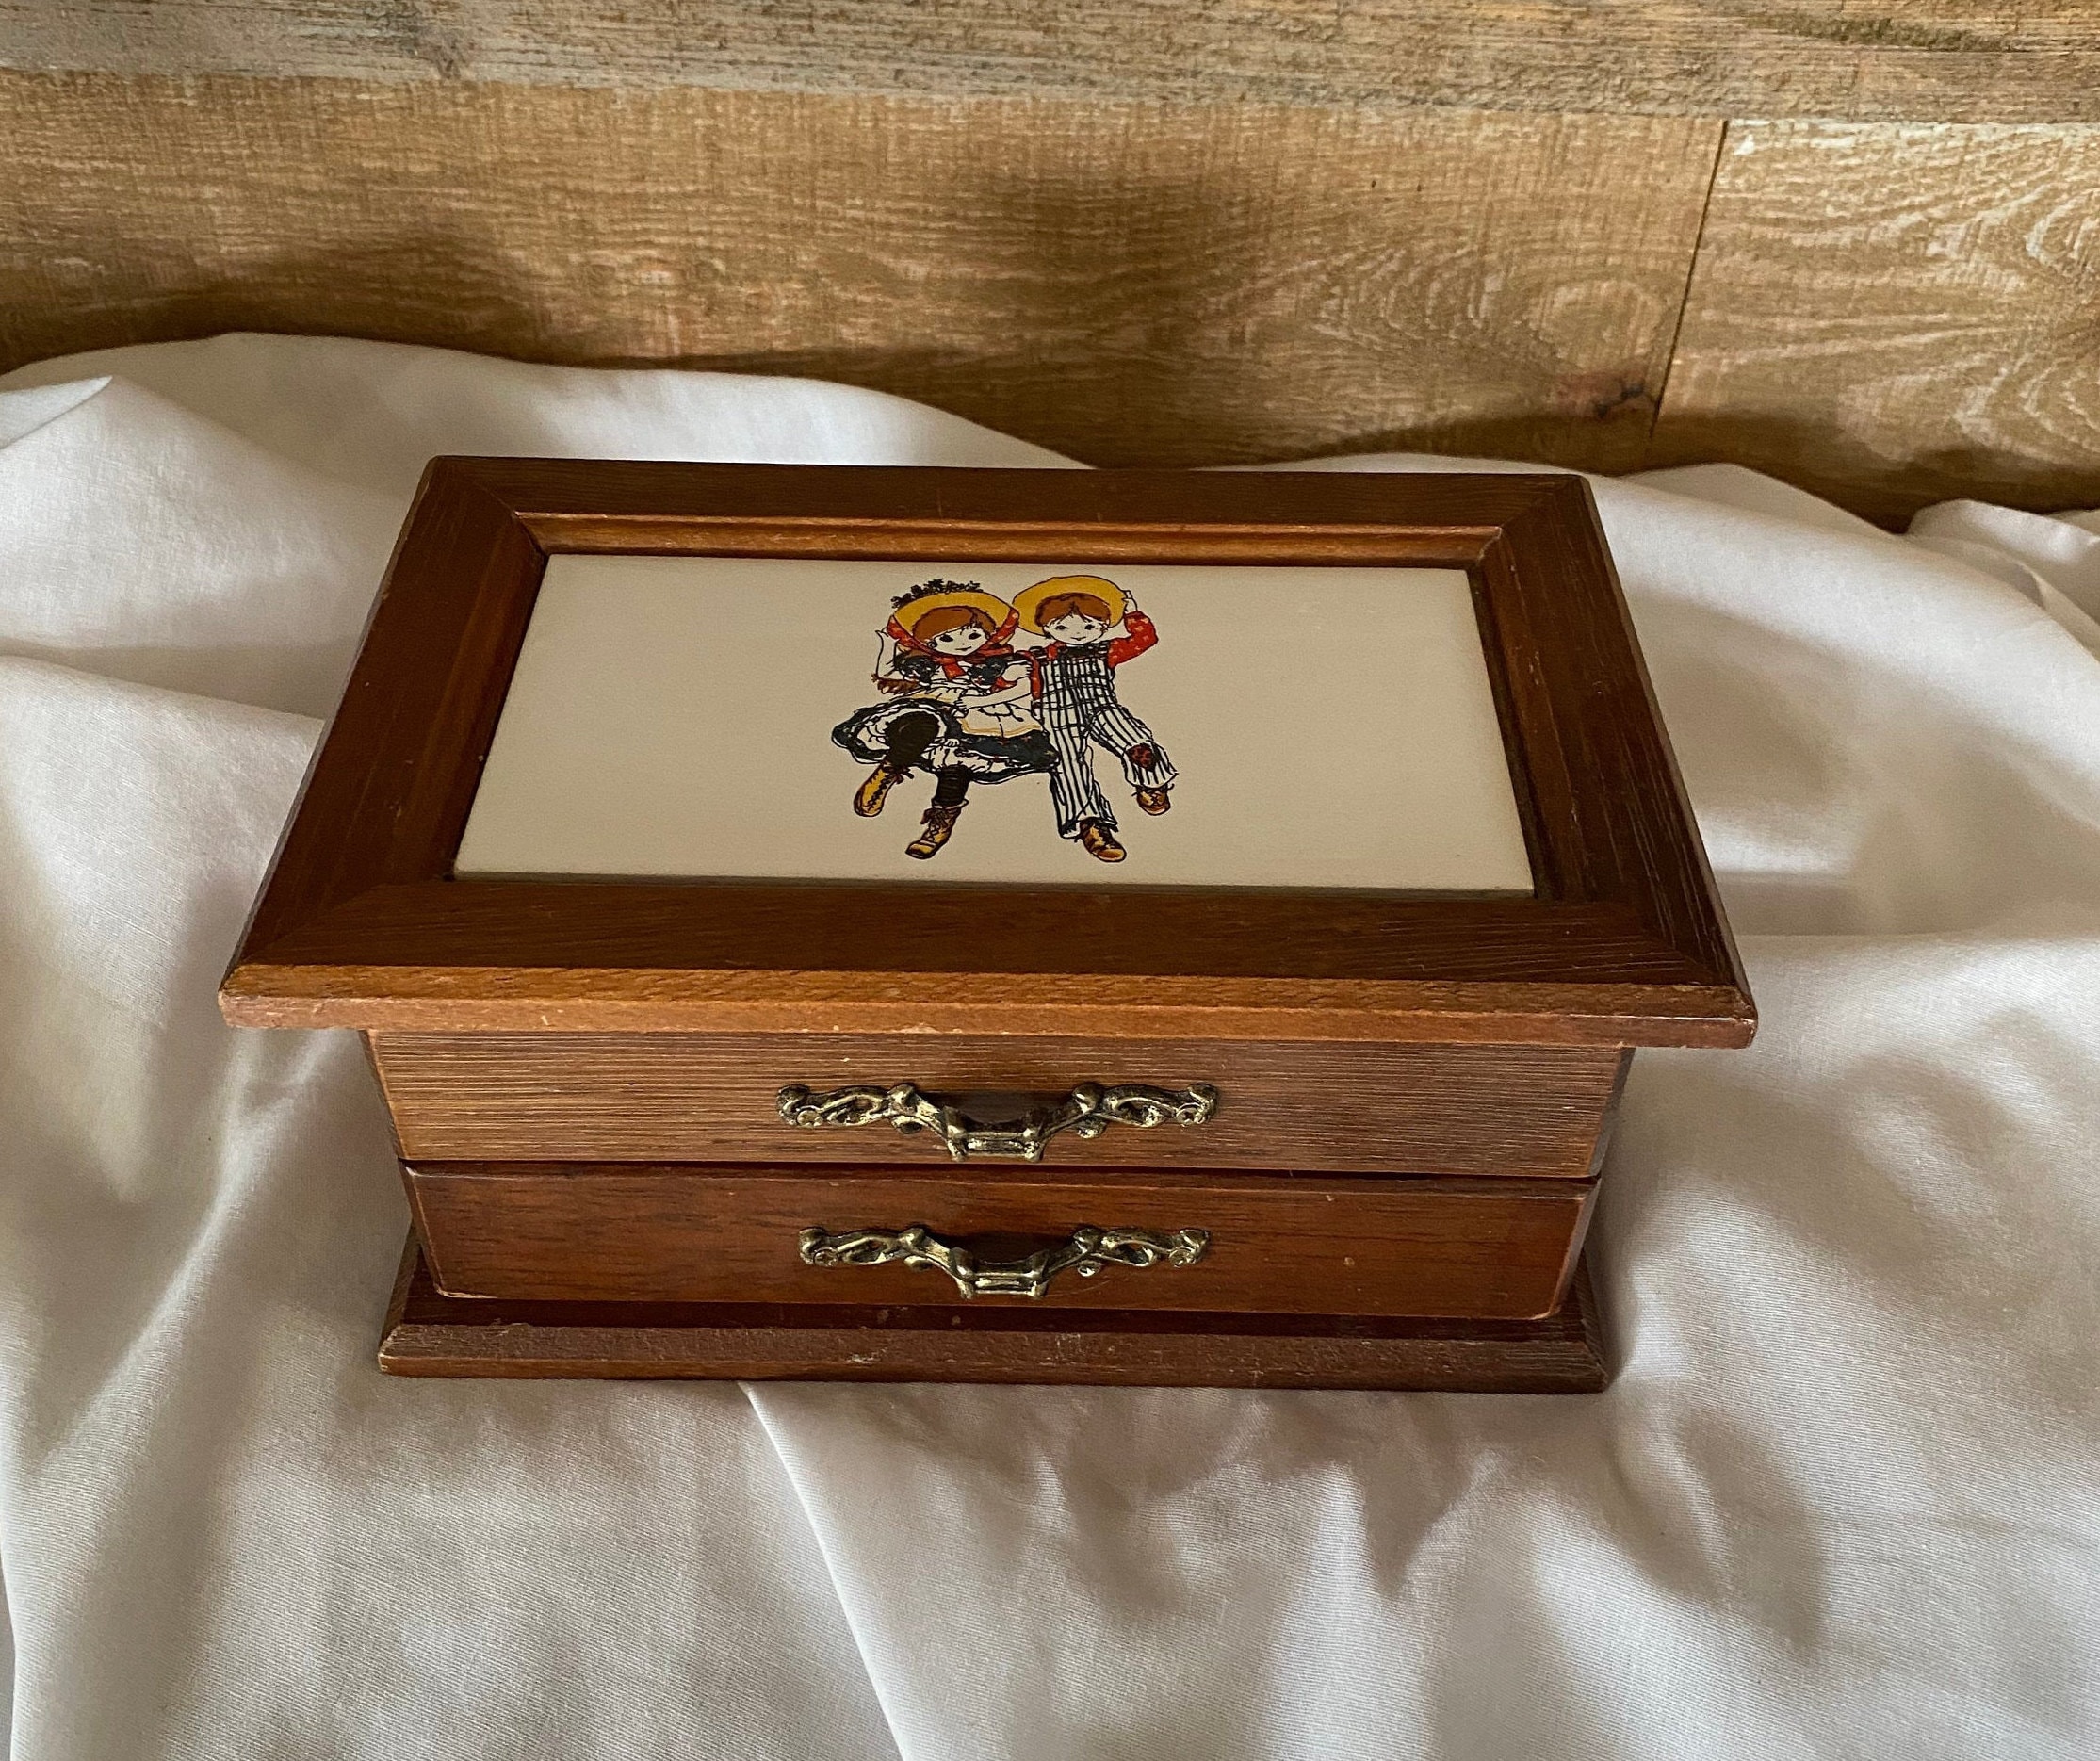 Wooden Jewelry Box With Tile Top Mirror Inside and Drawer